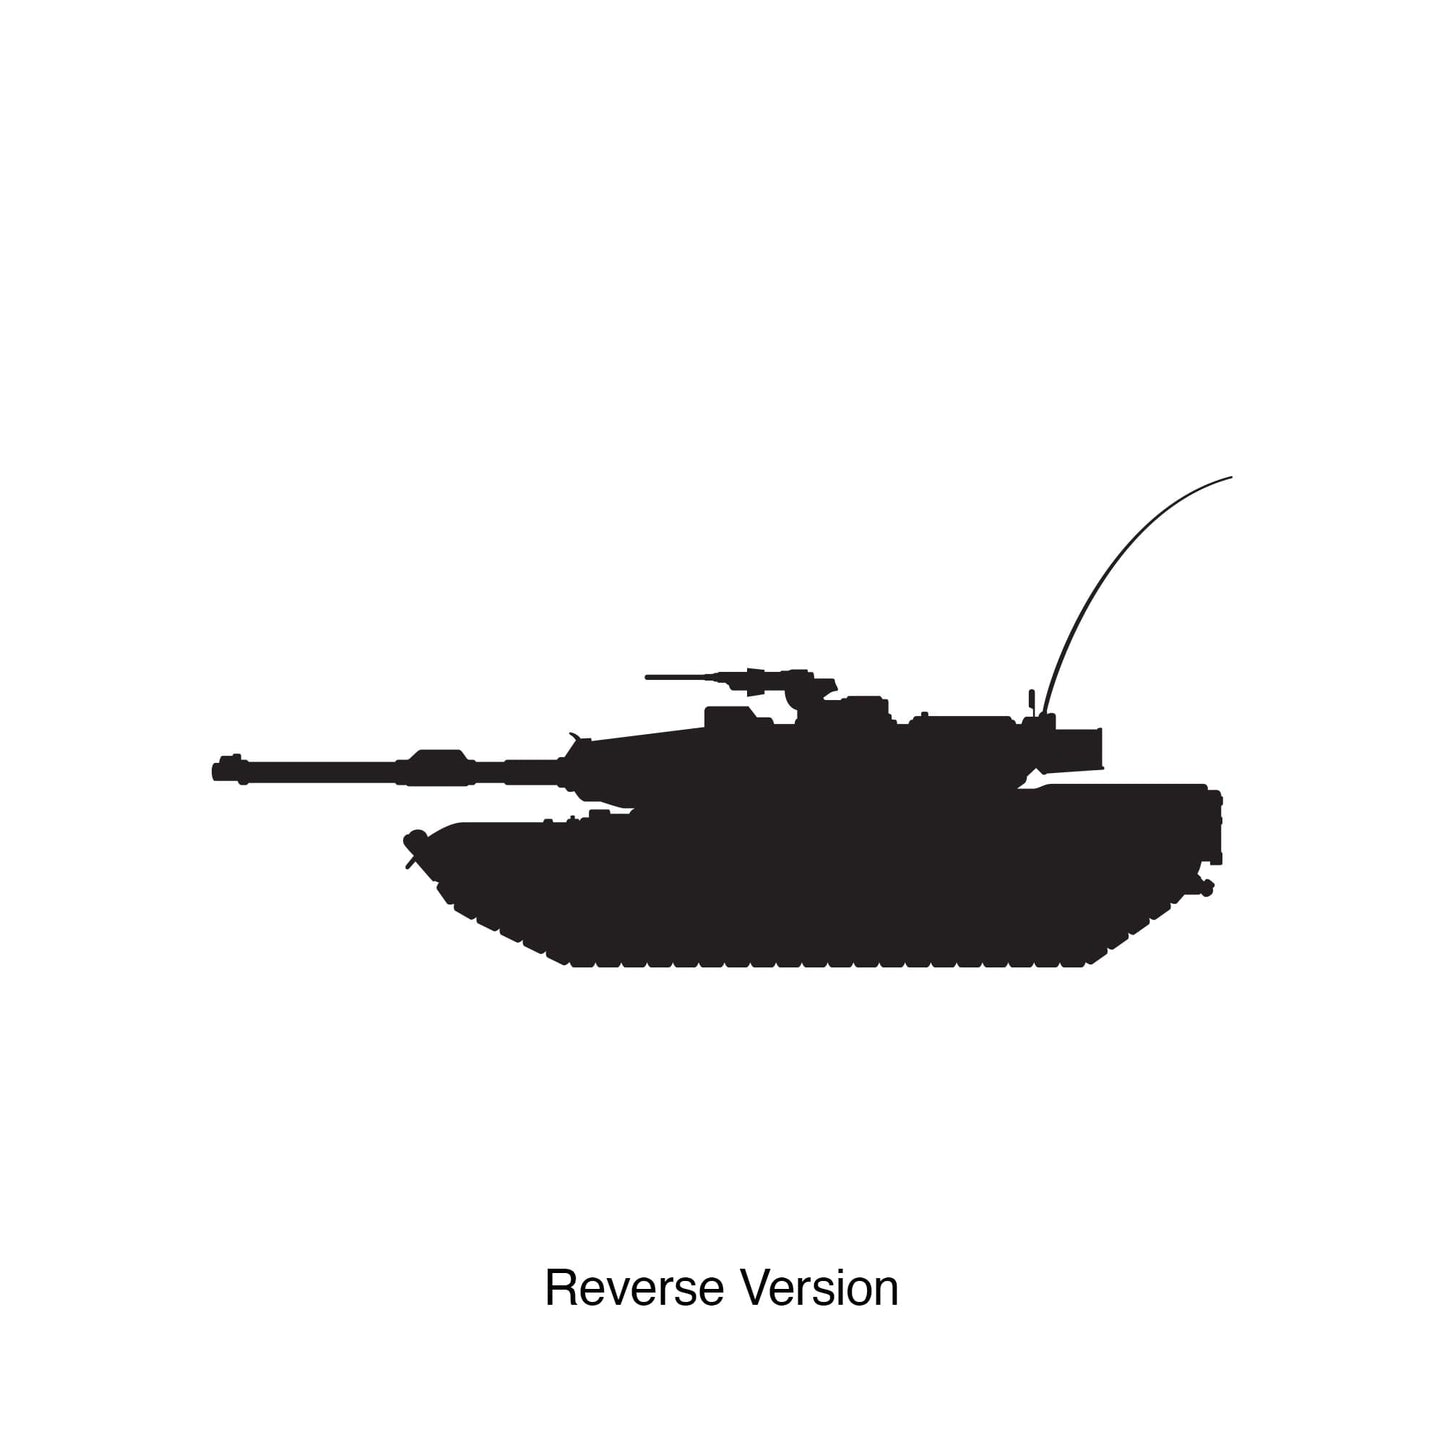 Military Army Tank Wall Decal Sticker. #211